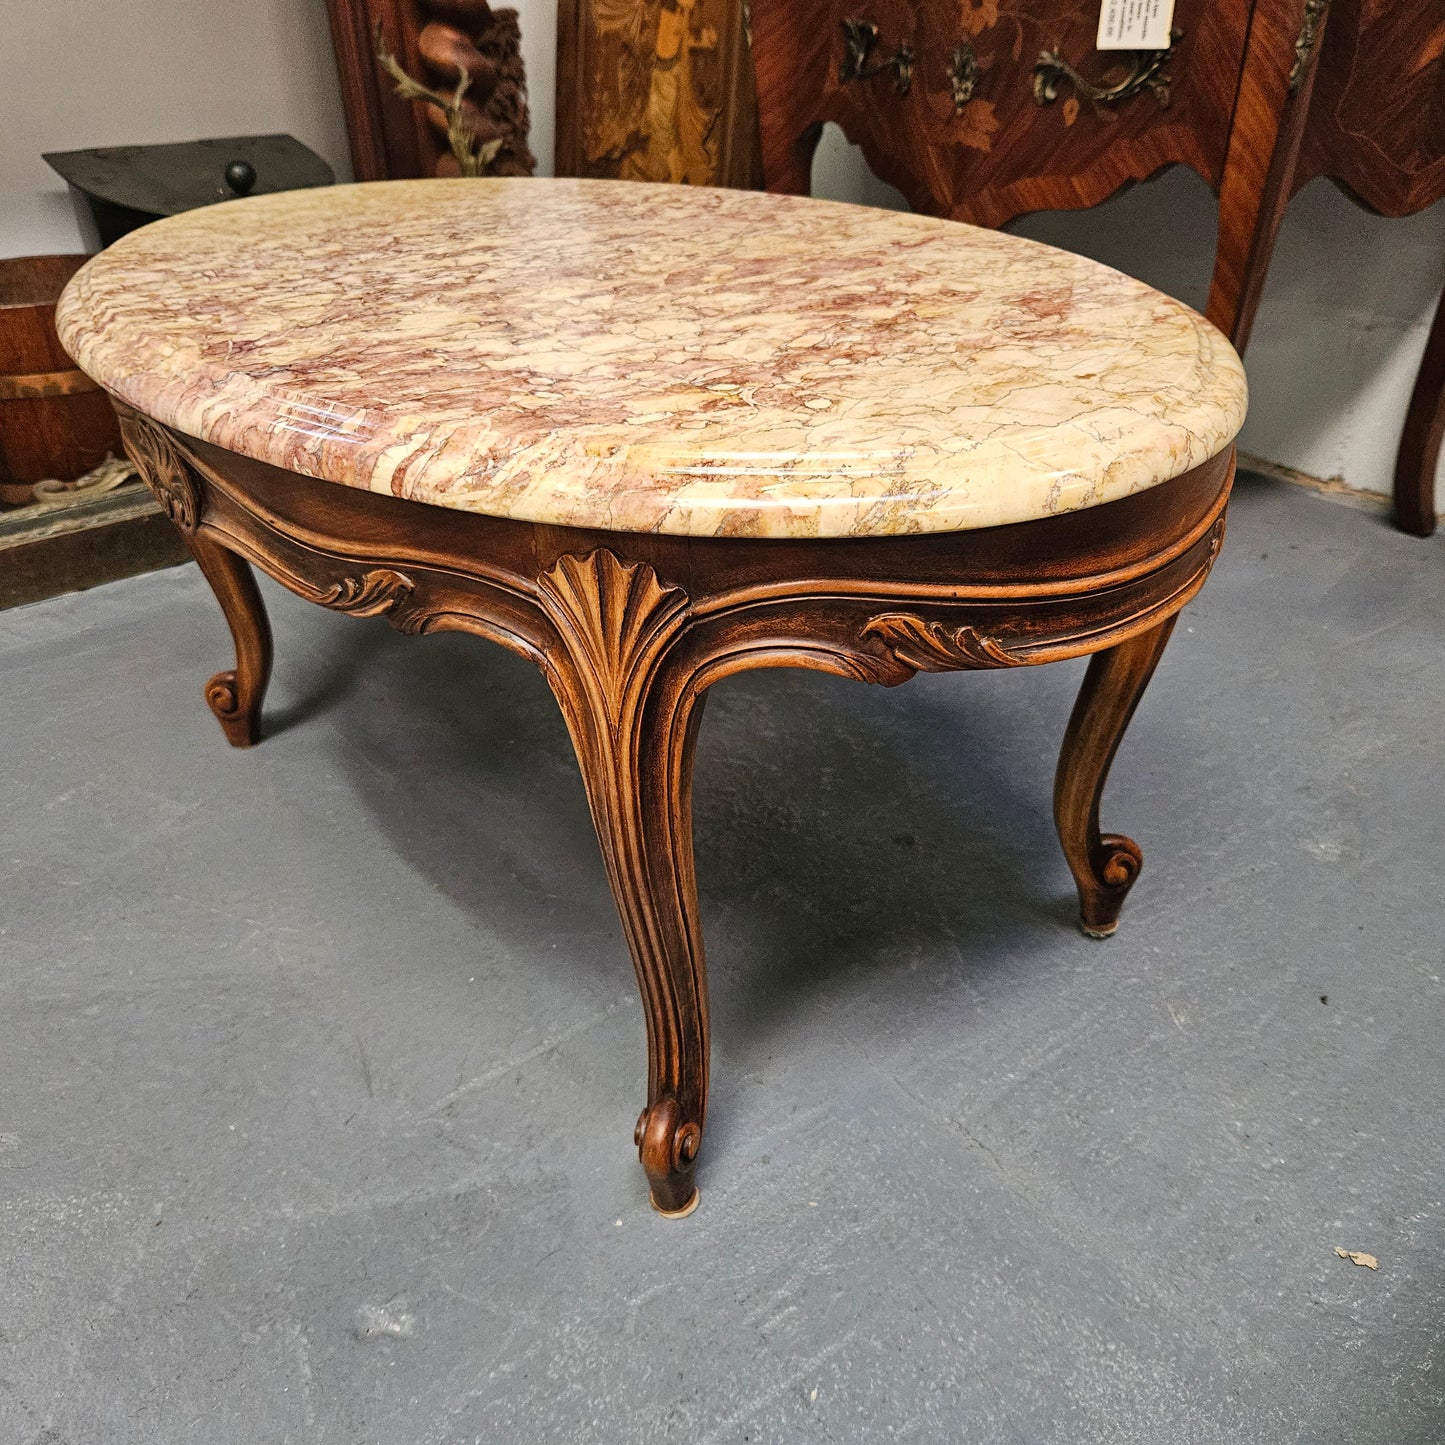 Lovely Louis XV style French fruitwood oval coffee table with a beautiful marble top. This piece is in great original condition and have been detailed to maintain its original condition.